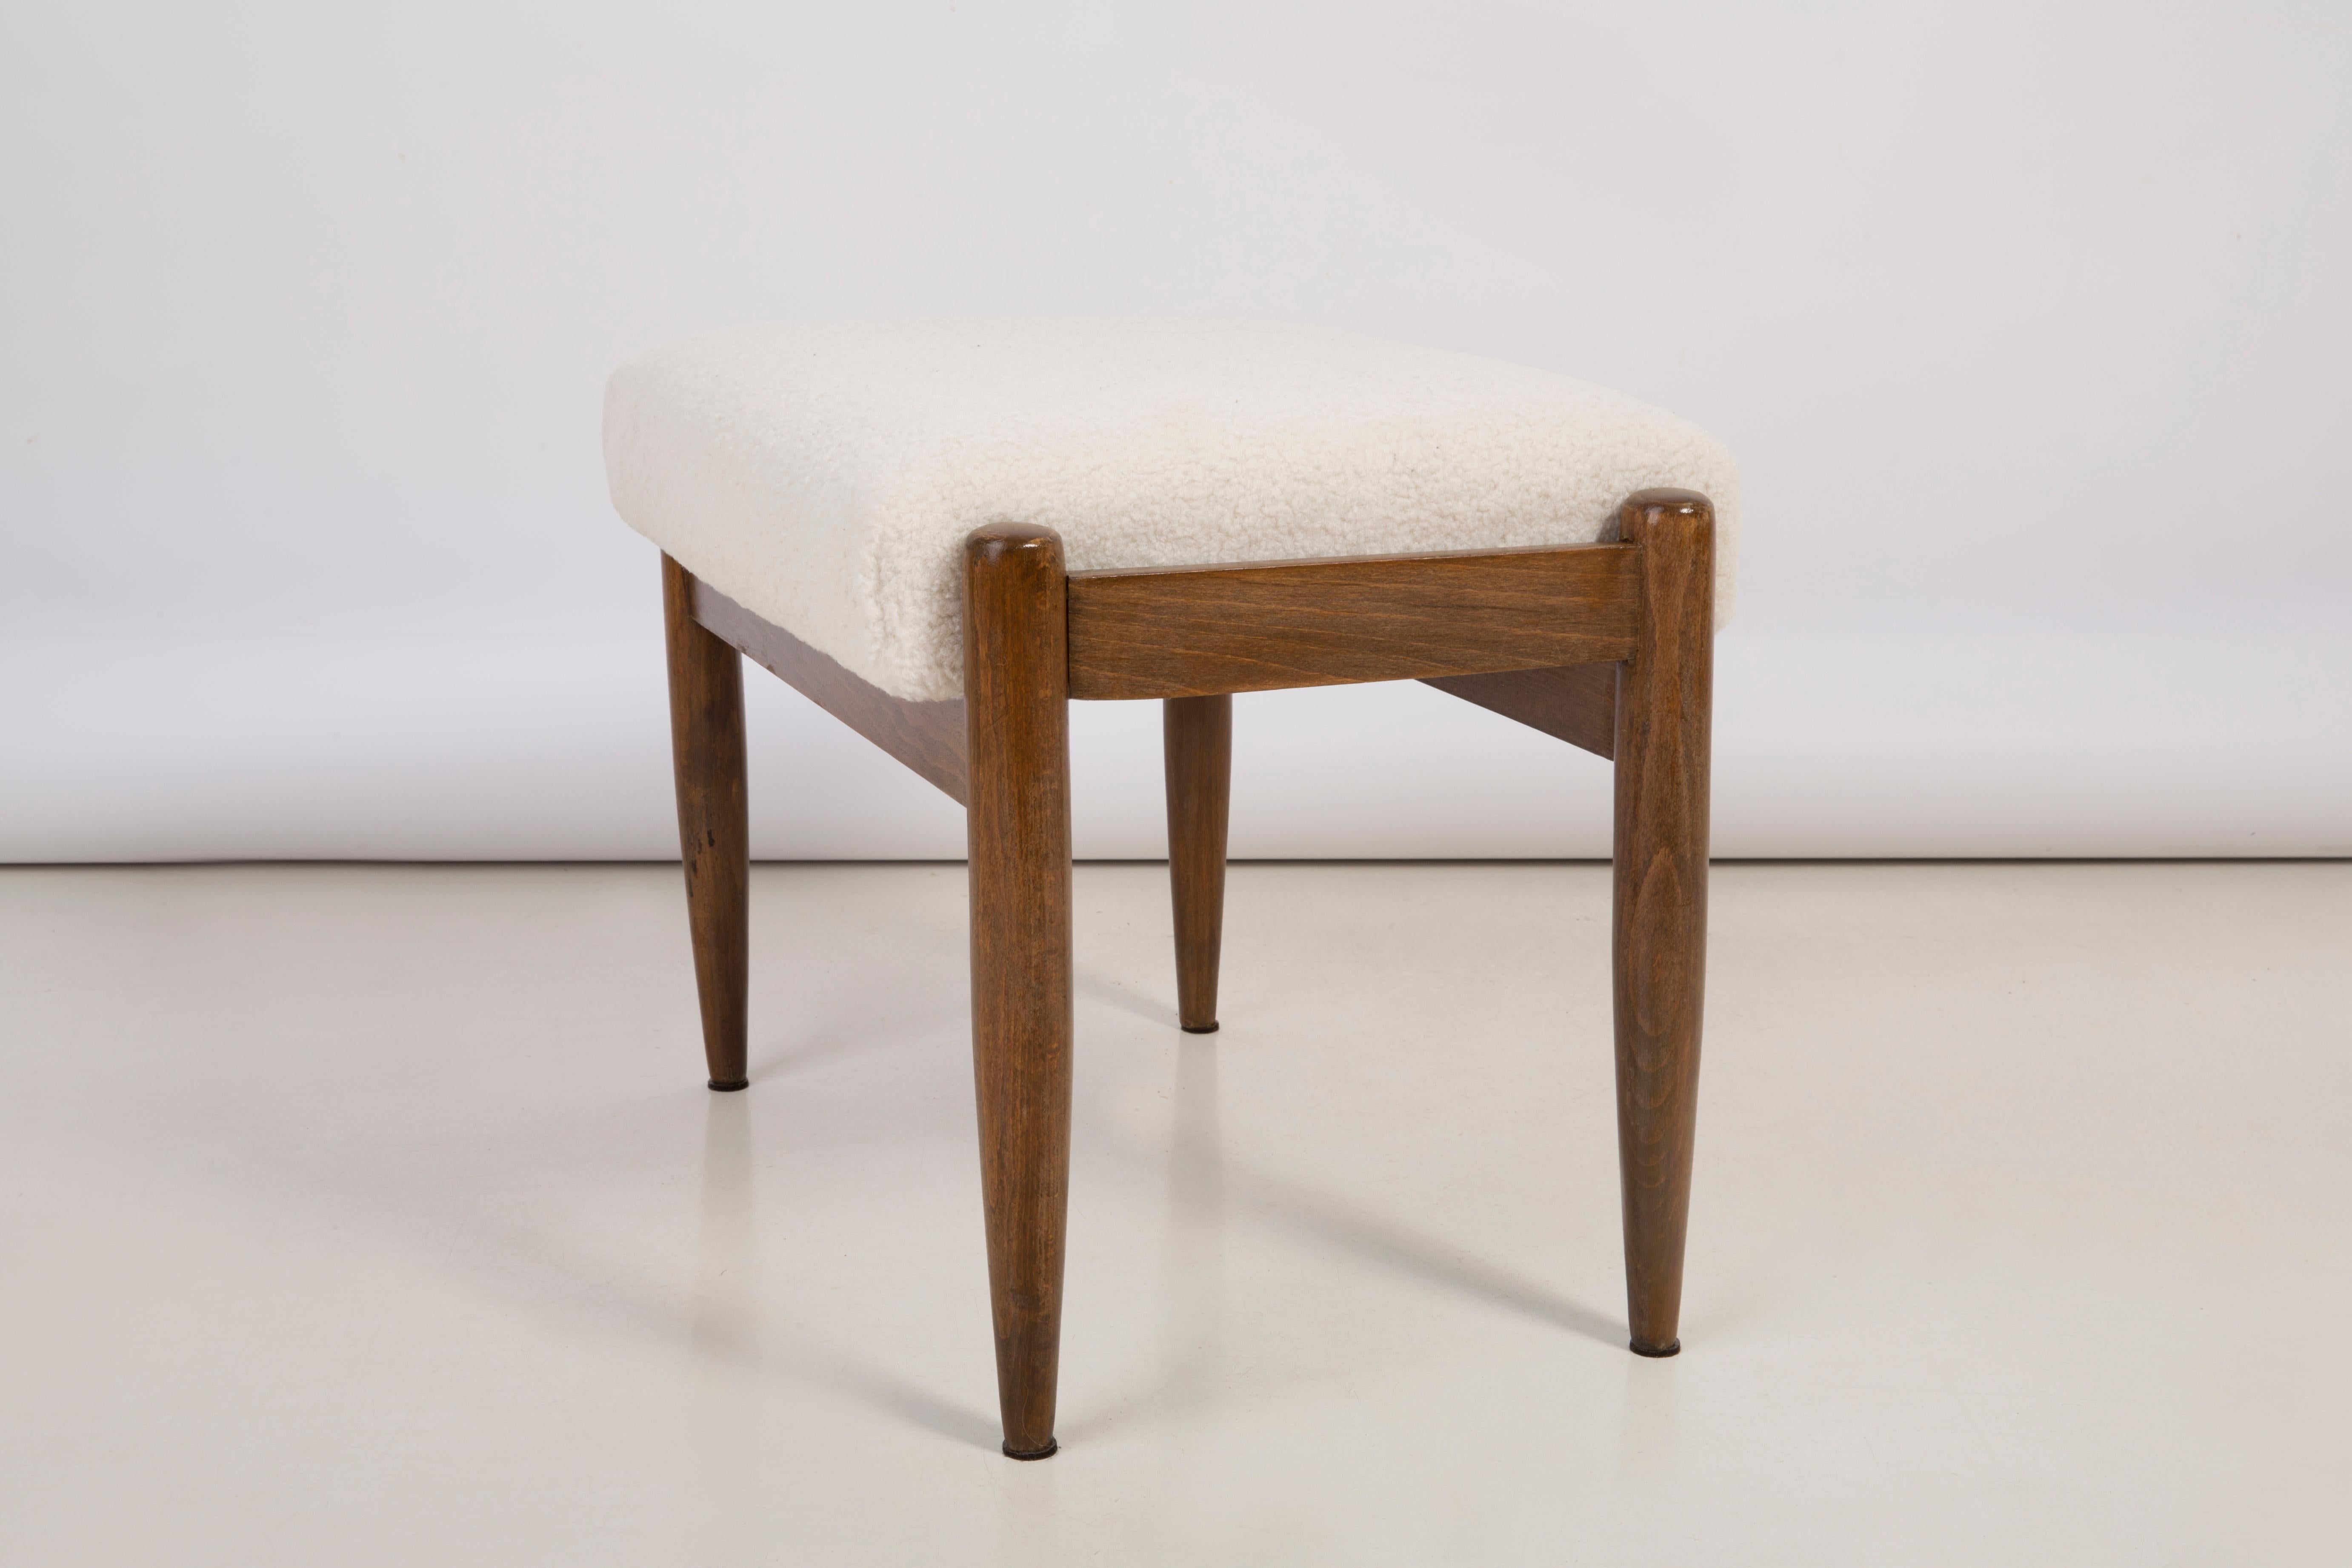 Stool from the turn of the 1960s. The stool consists of an upholstered part, a seat and wooden legs narrowing downwards, characteristic of the 1960s style. 

Stool was designed by Edmund Homa, a Polish architect, designer of industrial design and